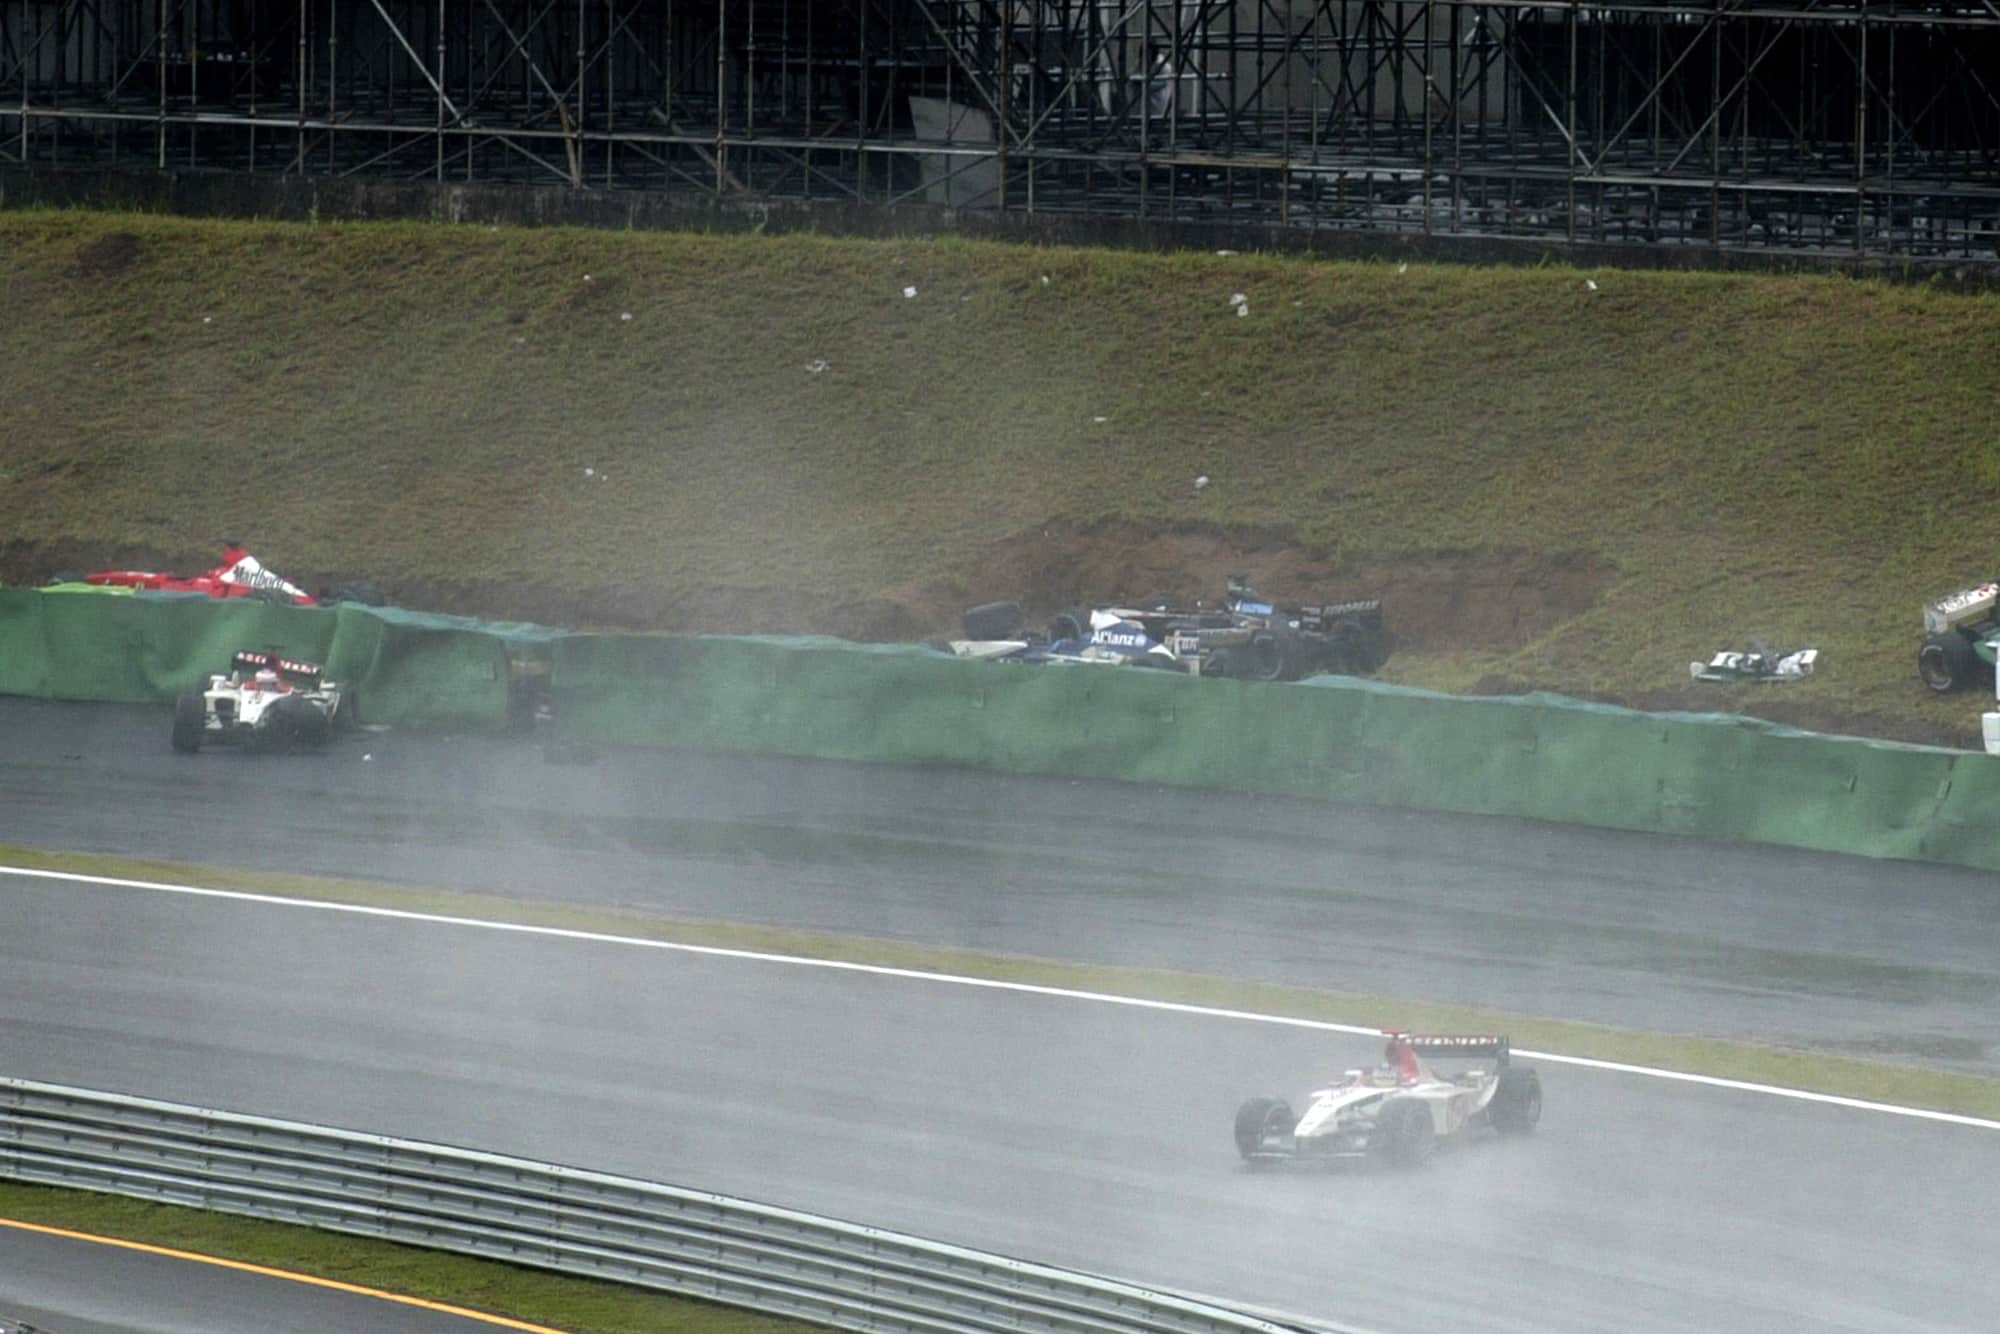 Cars aquaplane off the track during the 2003 Brazilian Grand Prix